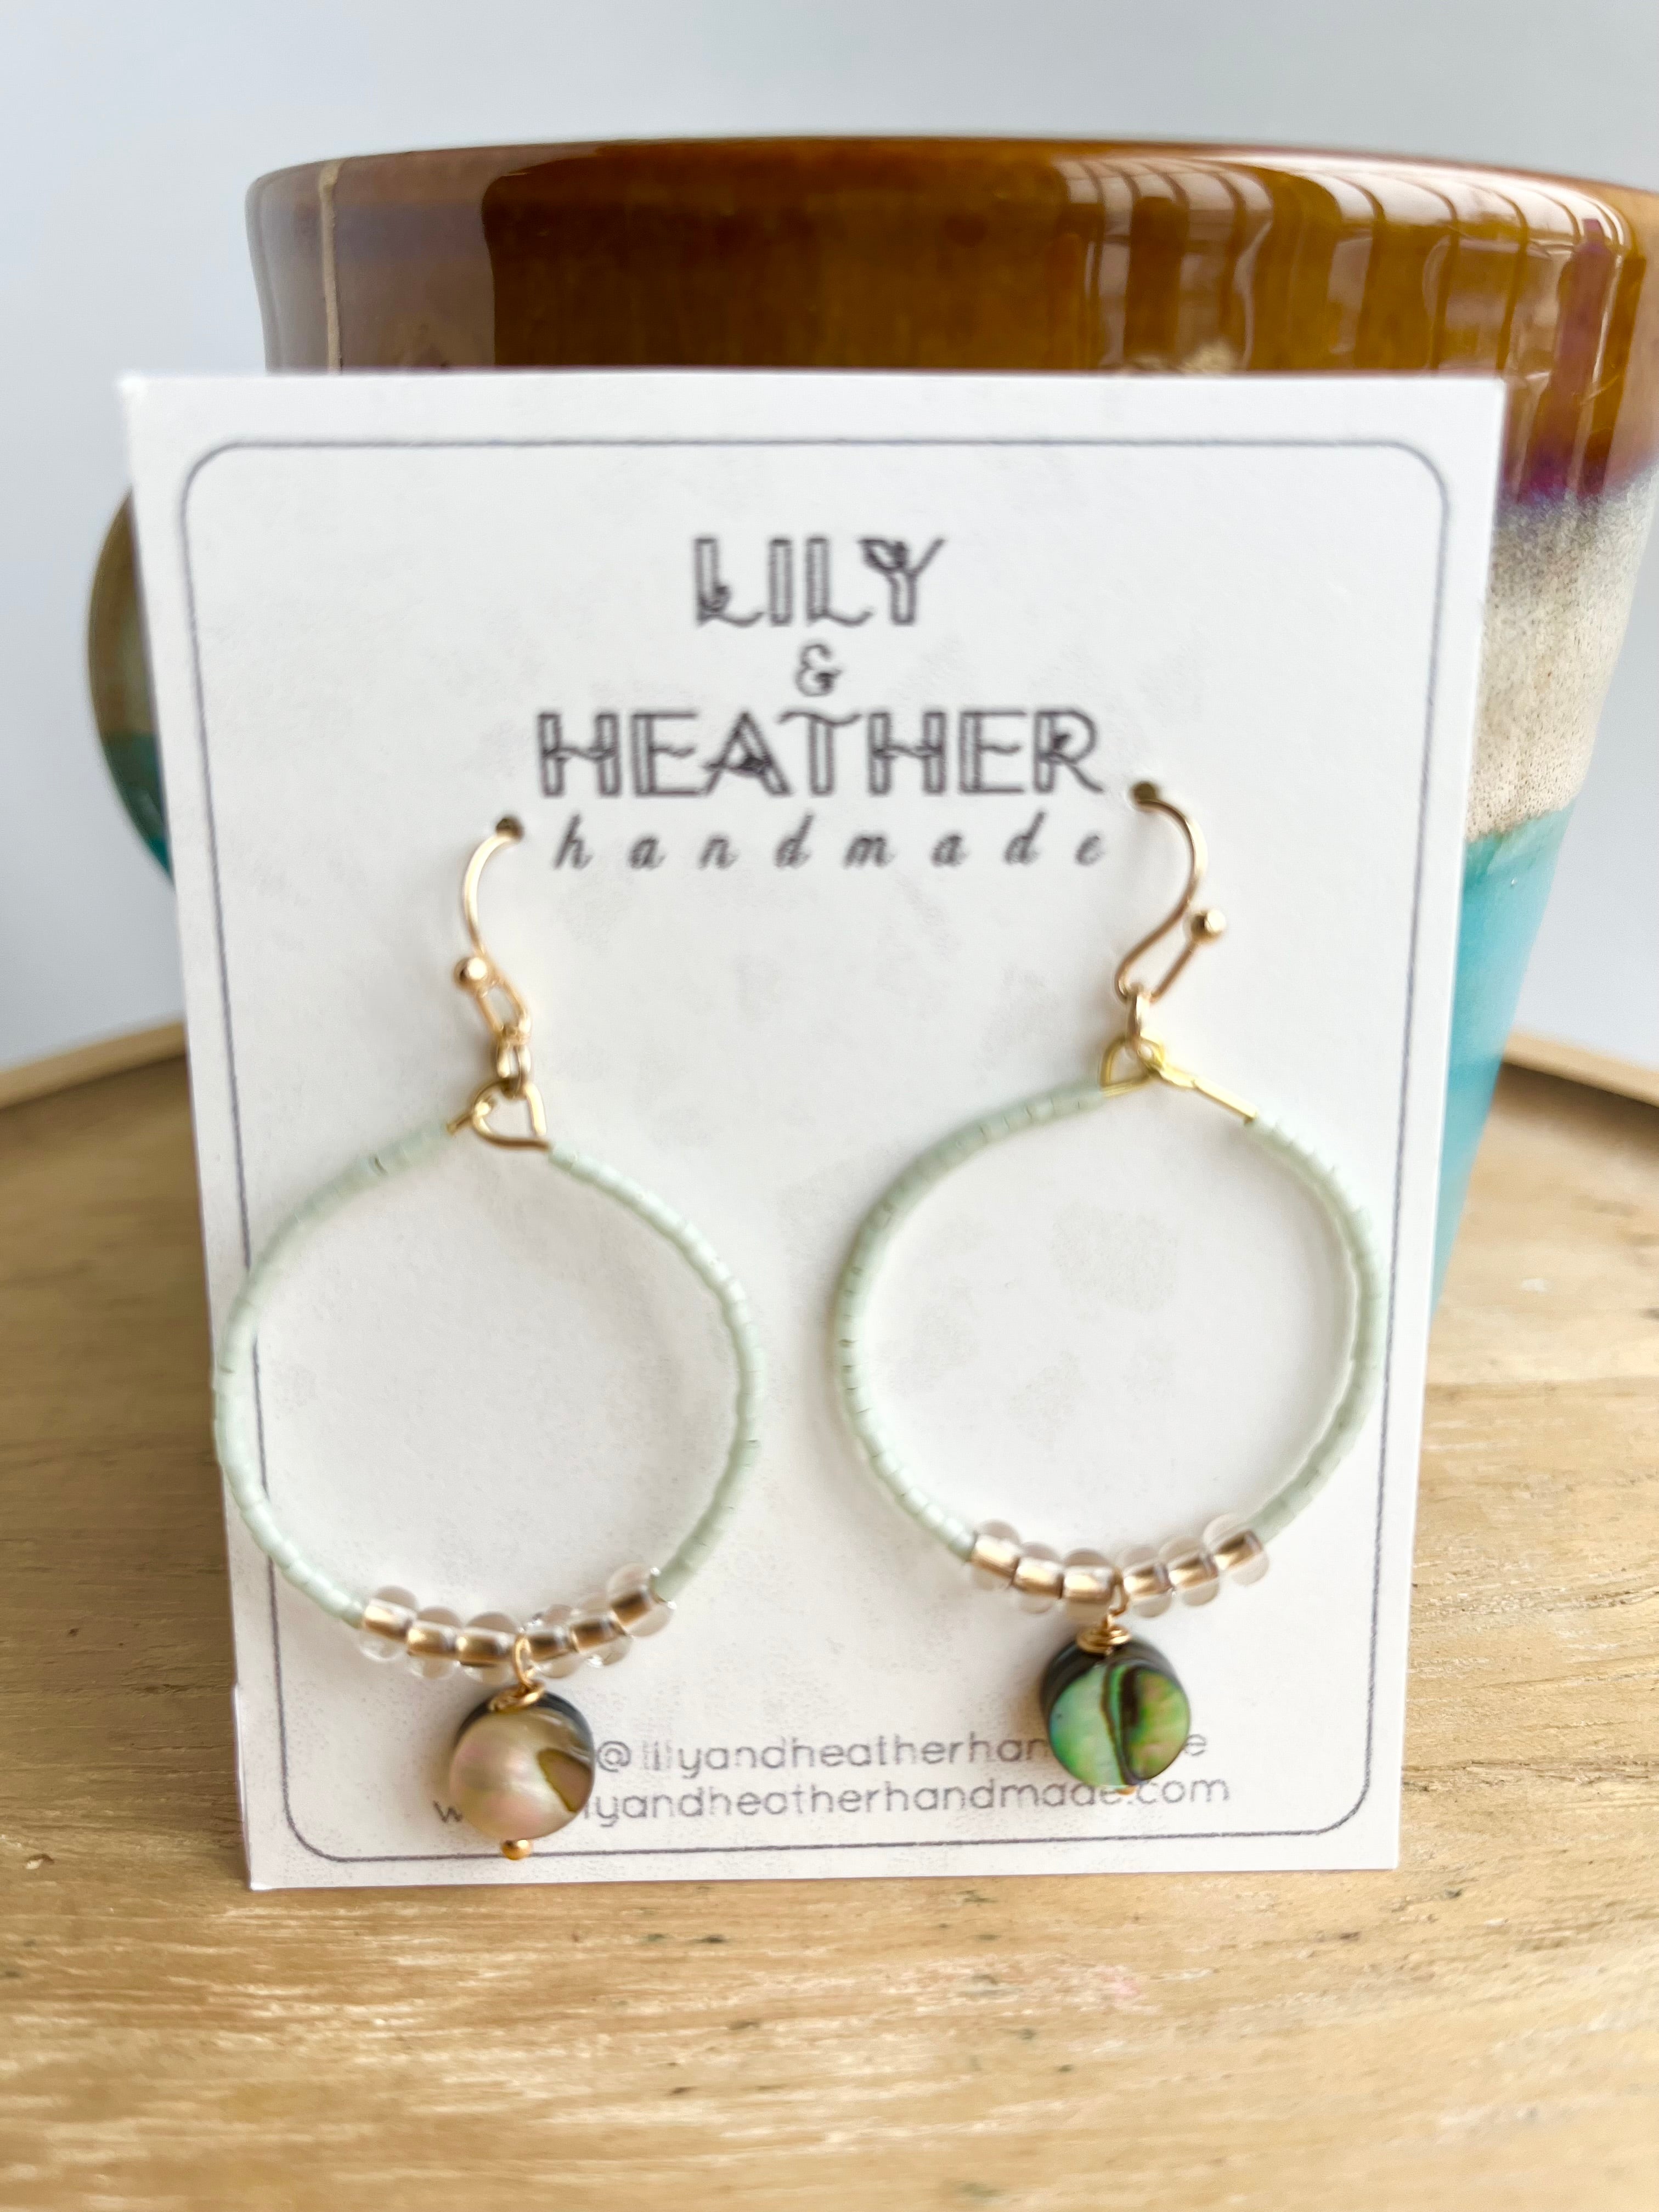 Hoop abalone, gold & mint seed beads - earrings from Lily & Heather handmade